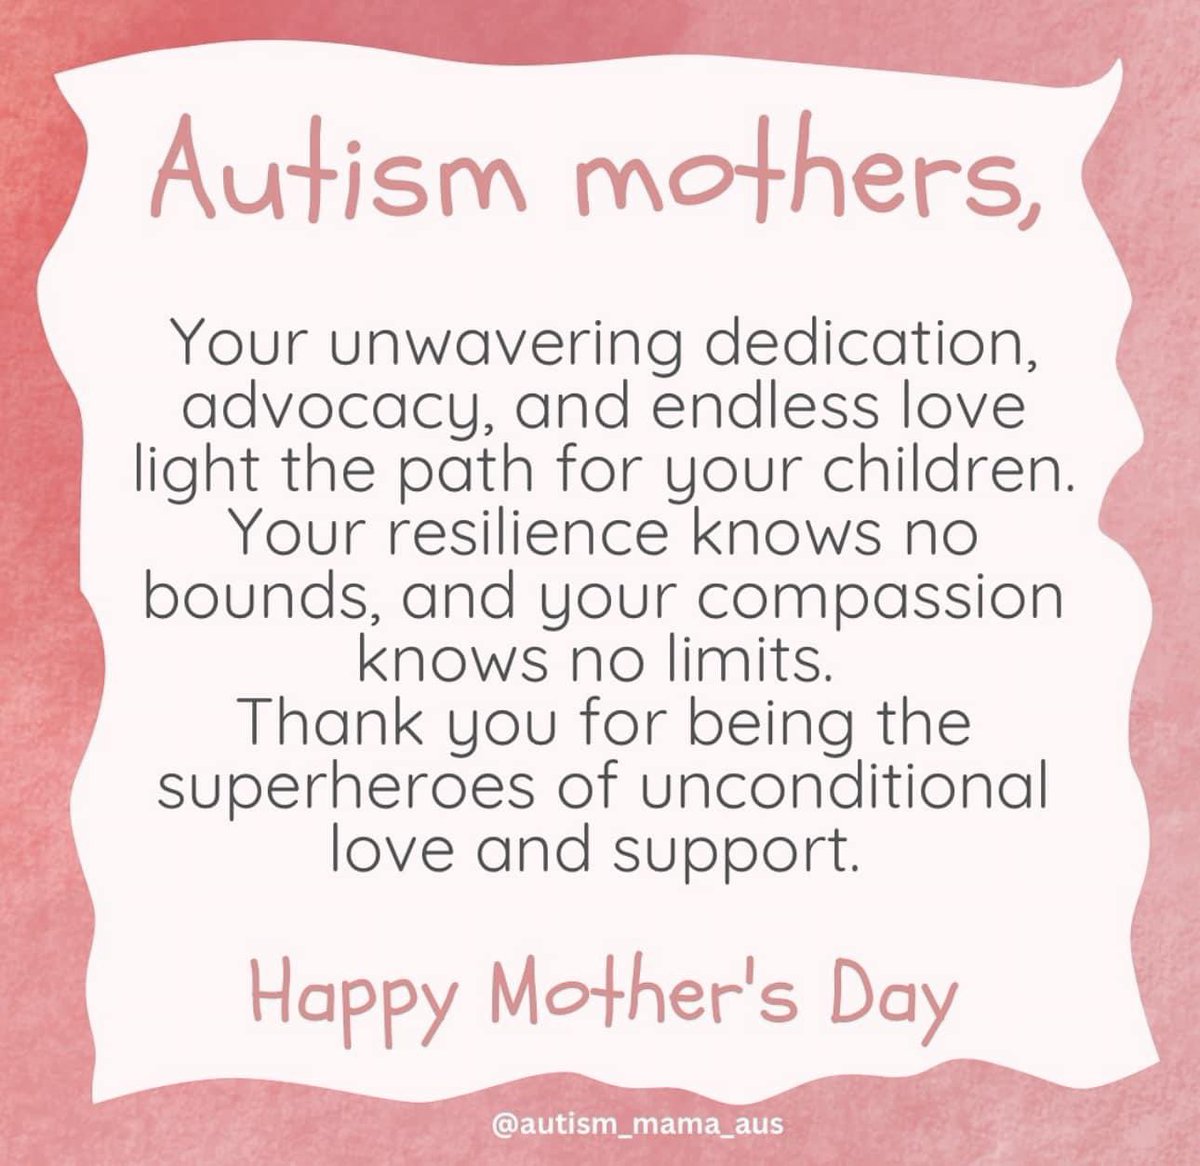 Happy Mother's Day to all the amazing mothers and caregivers of children on the autism spectrum! 💕💐🌷 

#mothersday #advocate #caregiver 
#autismparents #autismlove #autismacceptance #happymothersday #autismmom  #differentnotless #mothersday #autismmoms #mothersday